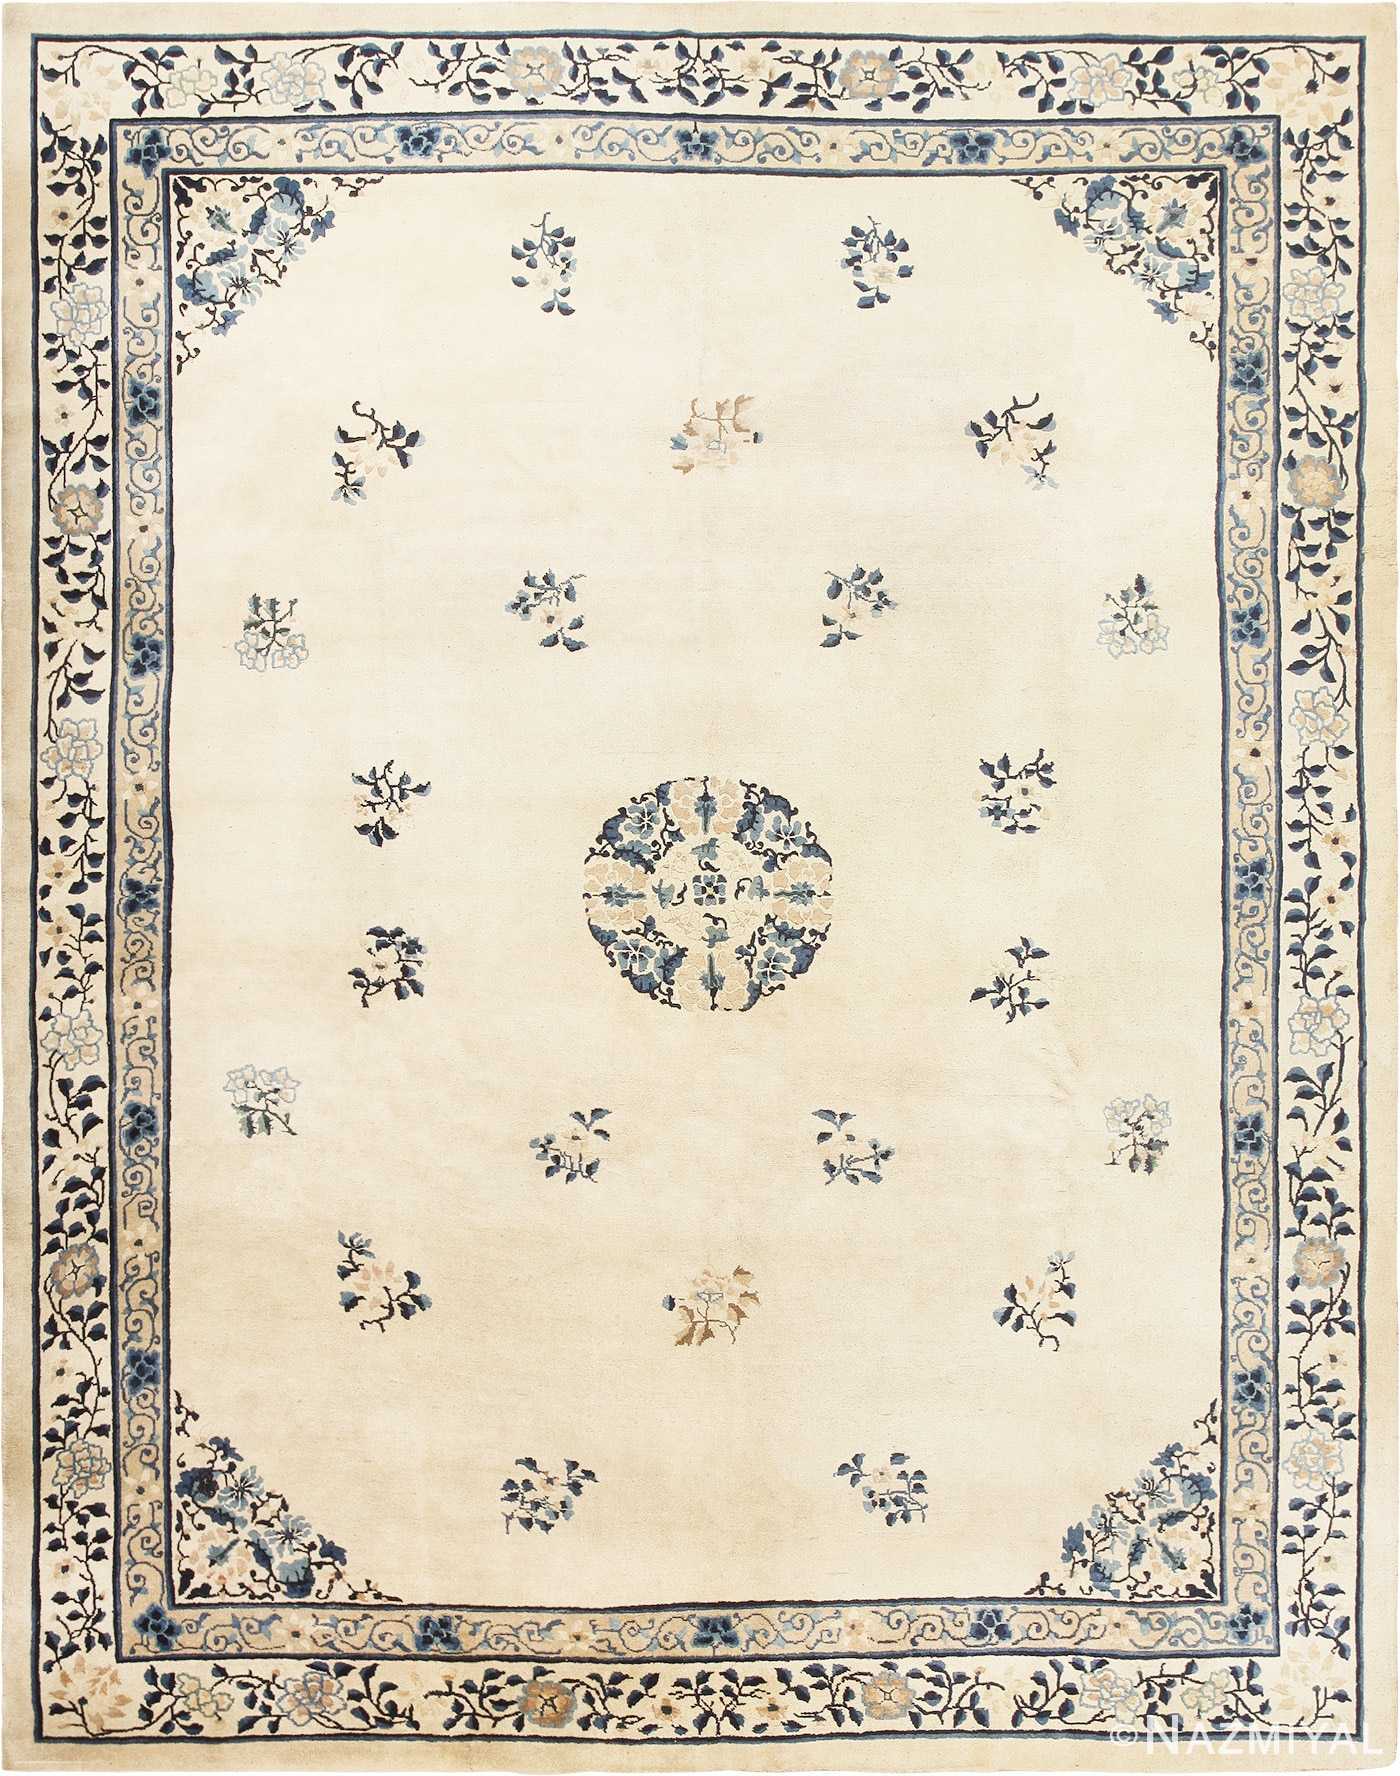 Antique Room Size Ivory and Blue Chinese Rug 49077 From Nazmiyal Antique Rugs in NYC